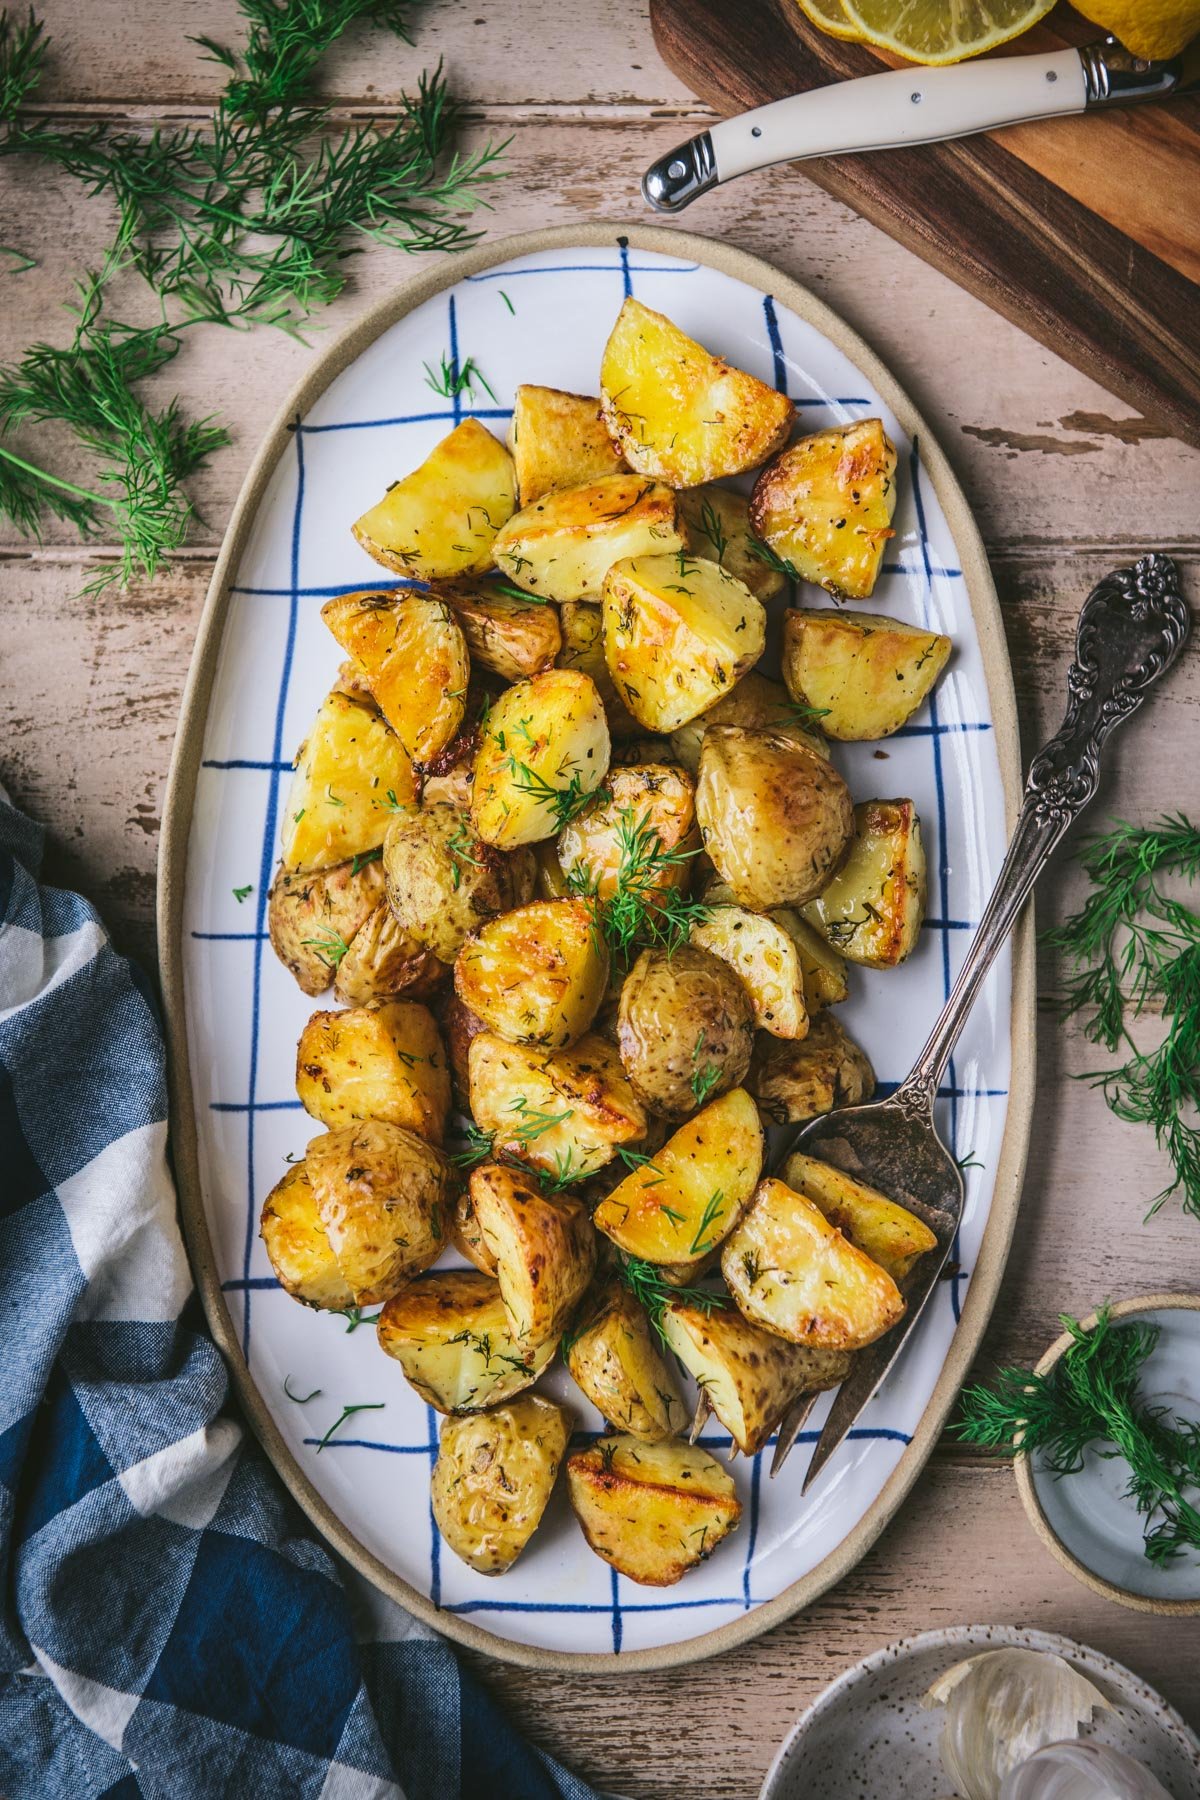 Roasted potatoes with dill and garlic on a wooden dinner table.